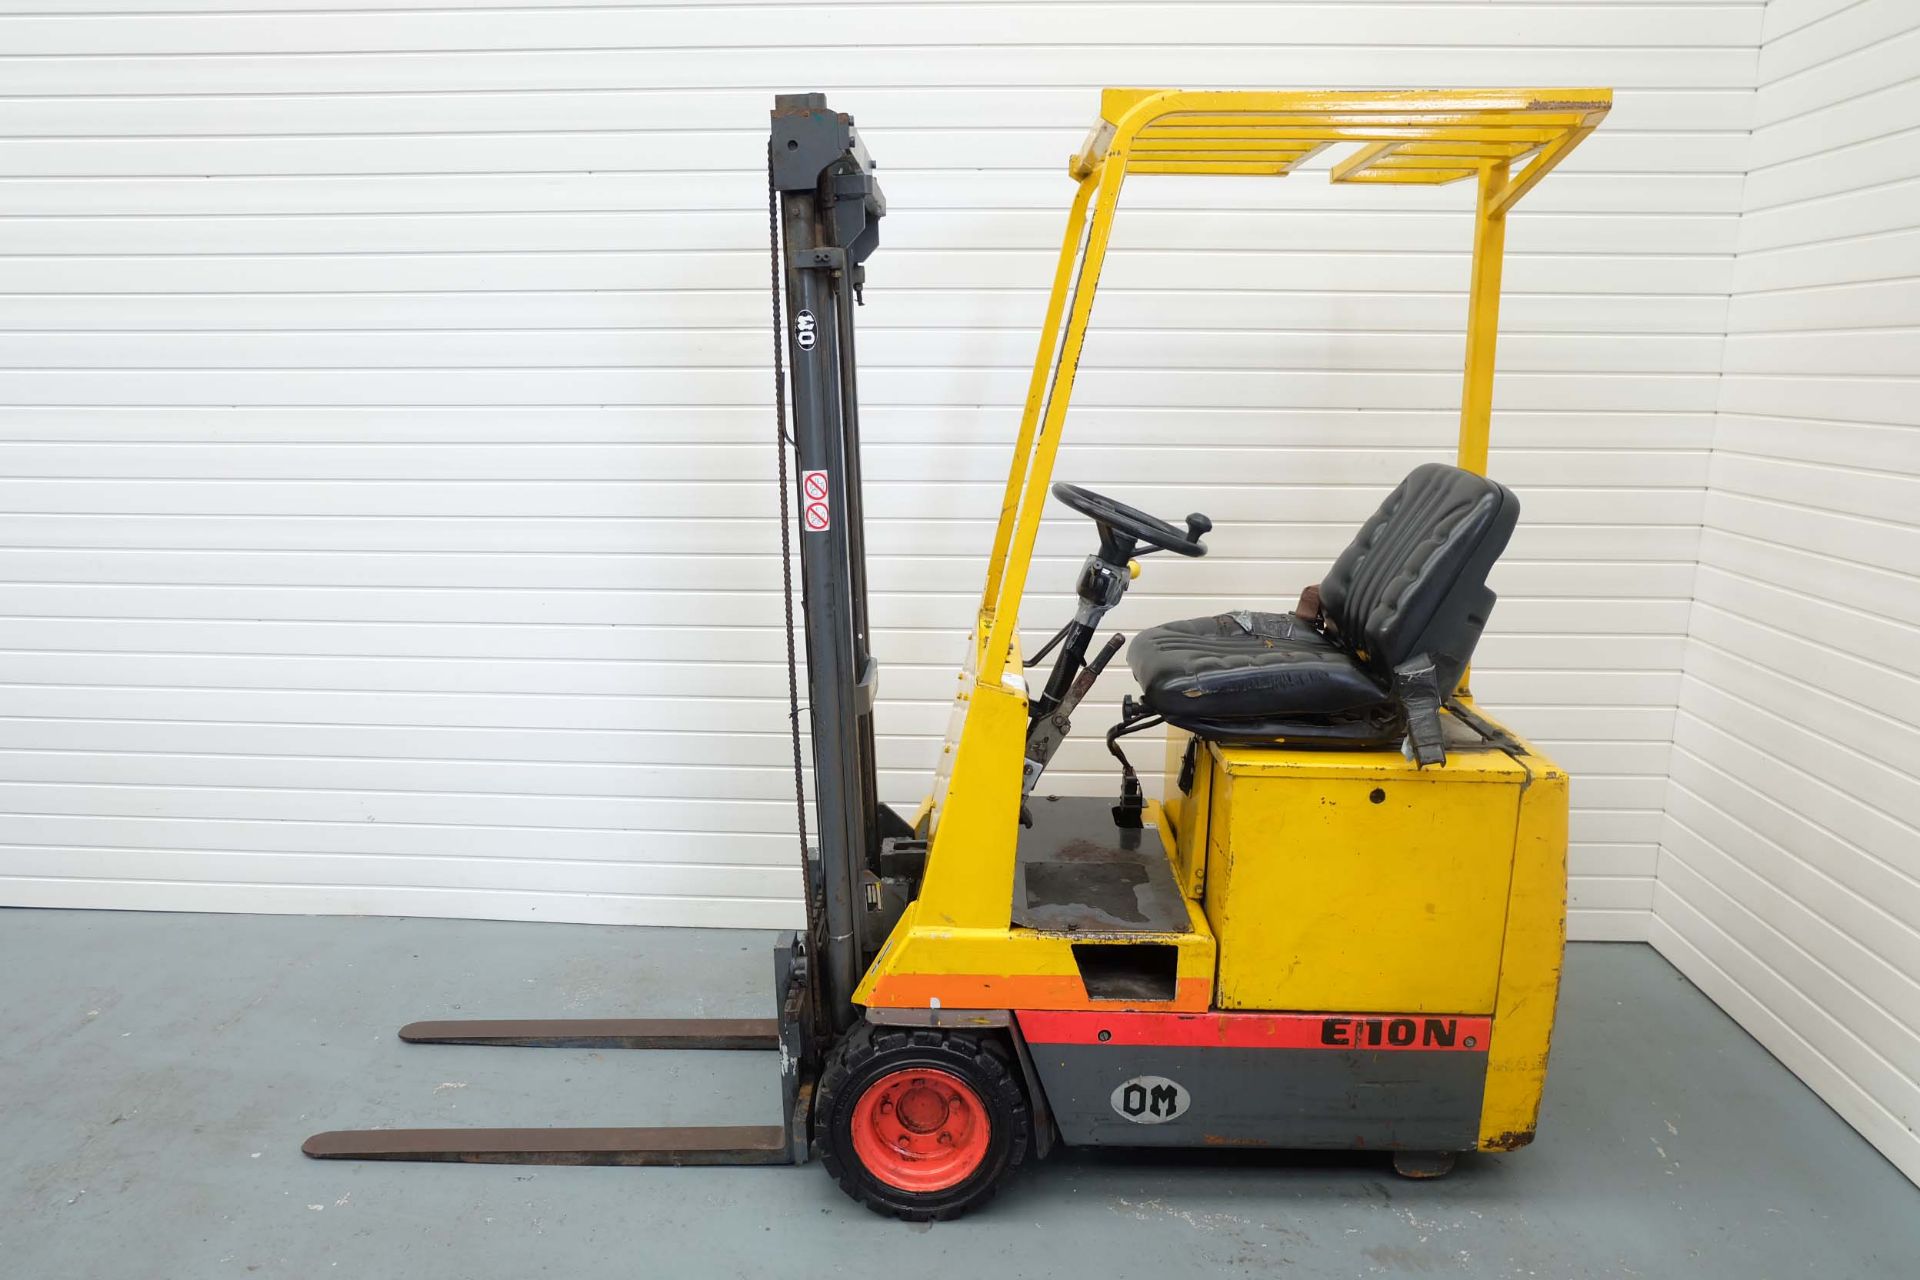 Fiat Model E10 ETI Electric Fork Lift Truck. Lifting Capacity 1000kg. Max Lifting height 3000mm. Wit